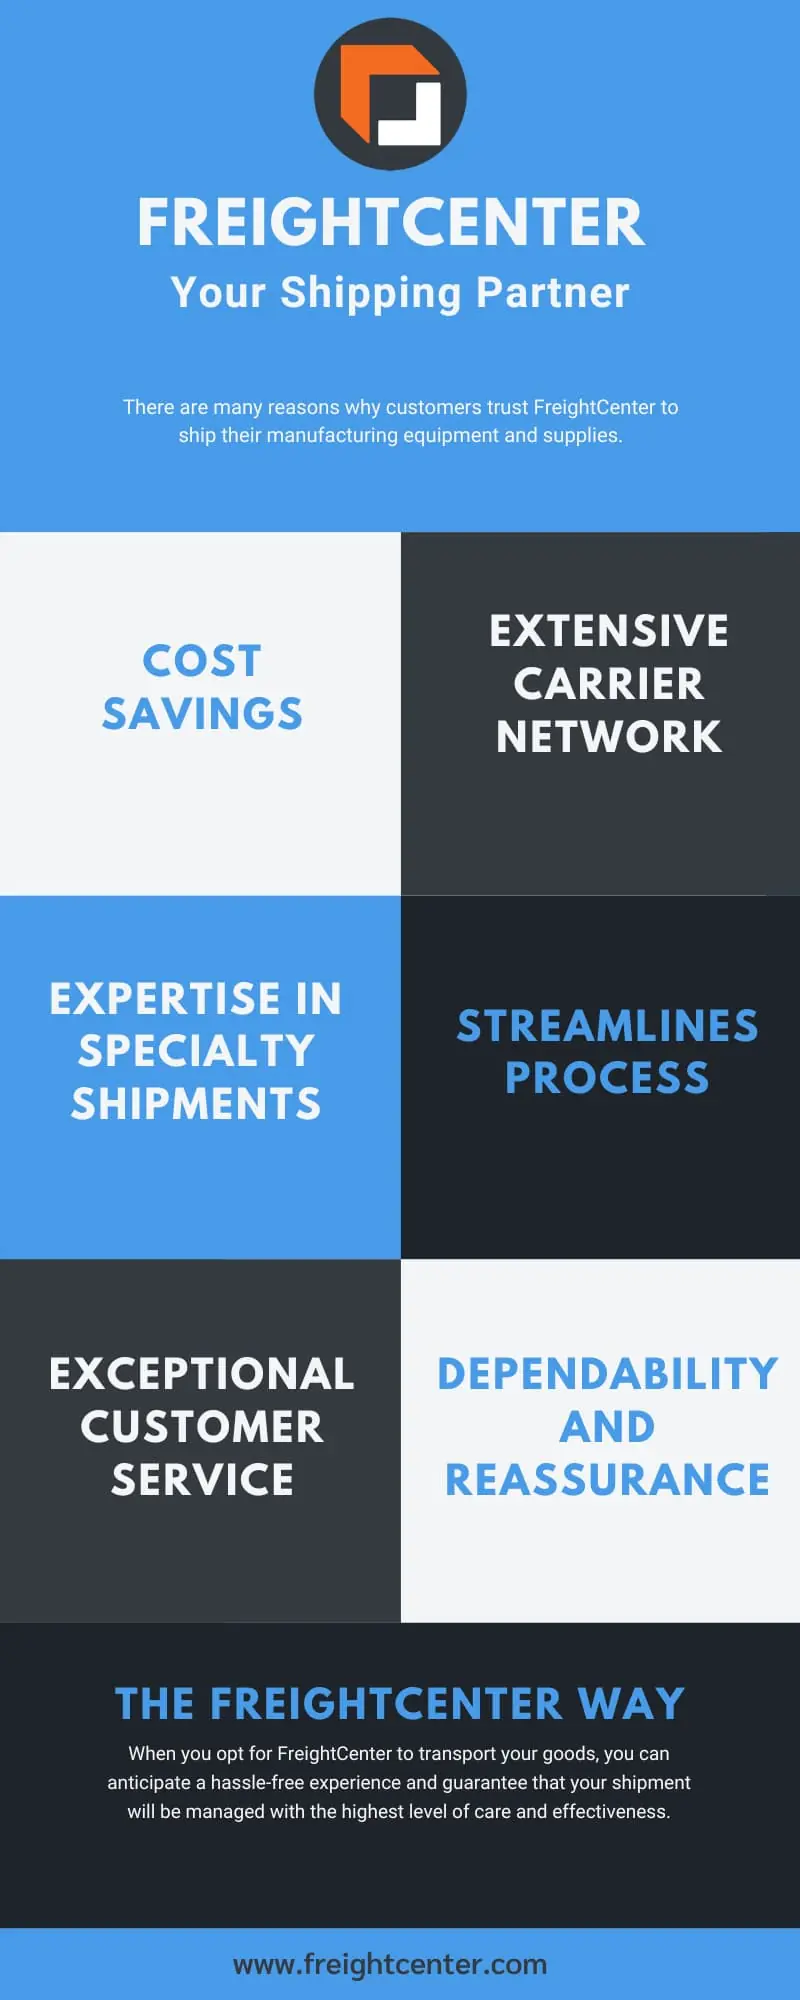 FreightCenter shipping partner infographic